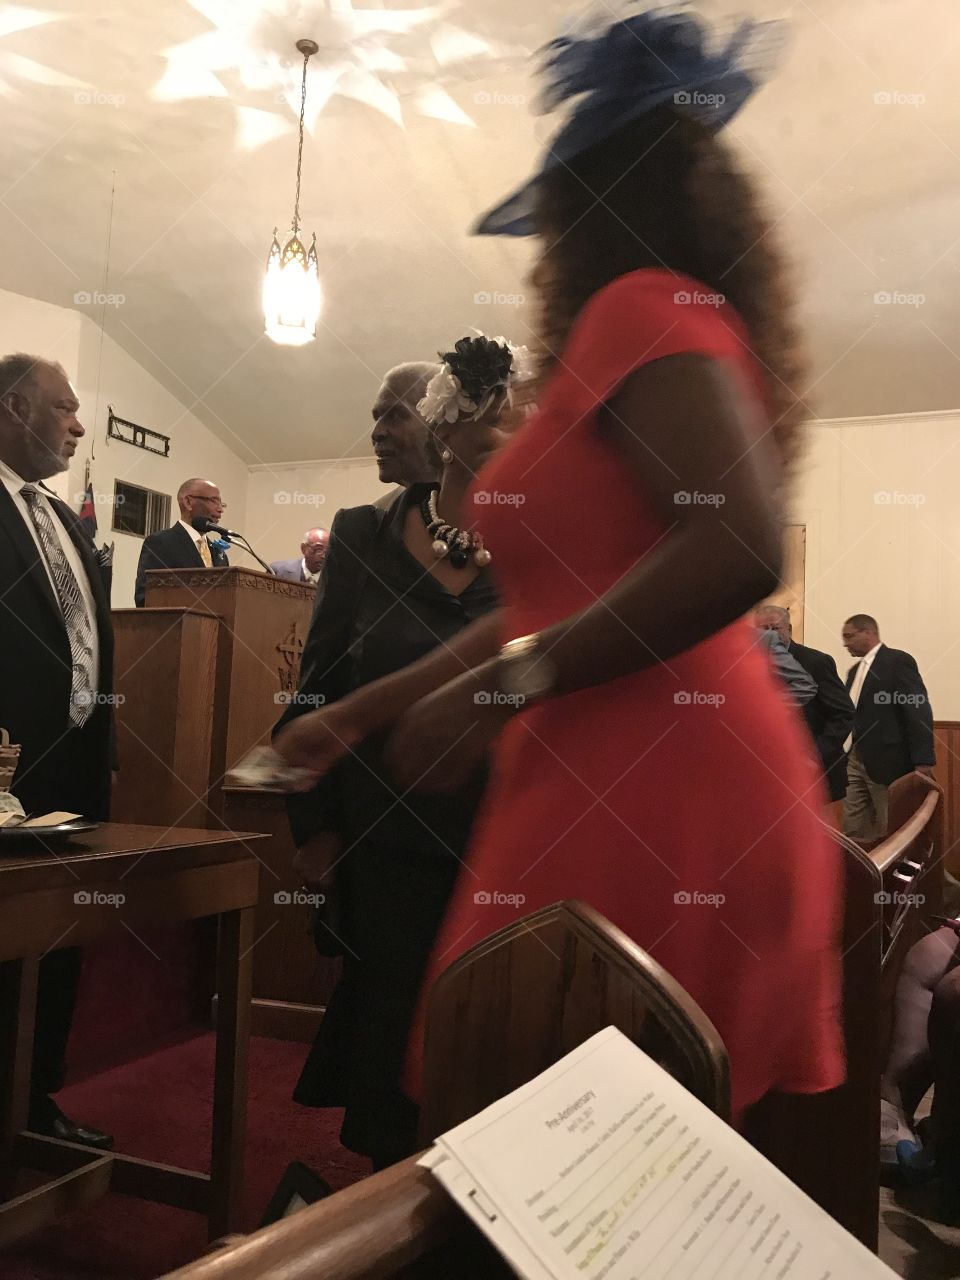 Church service, praising, lady in red